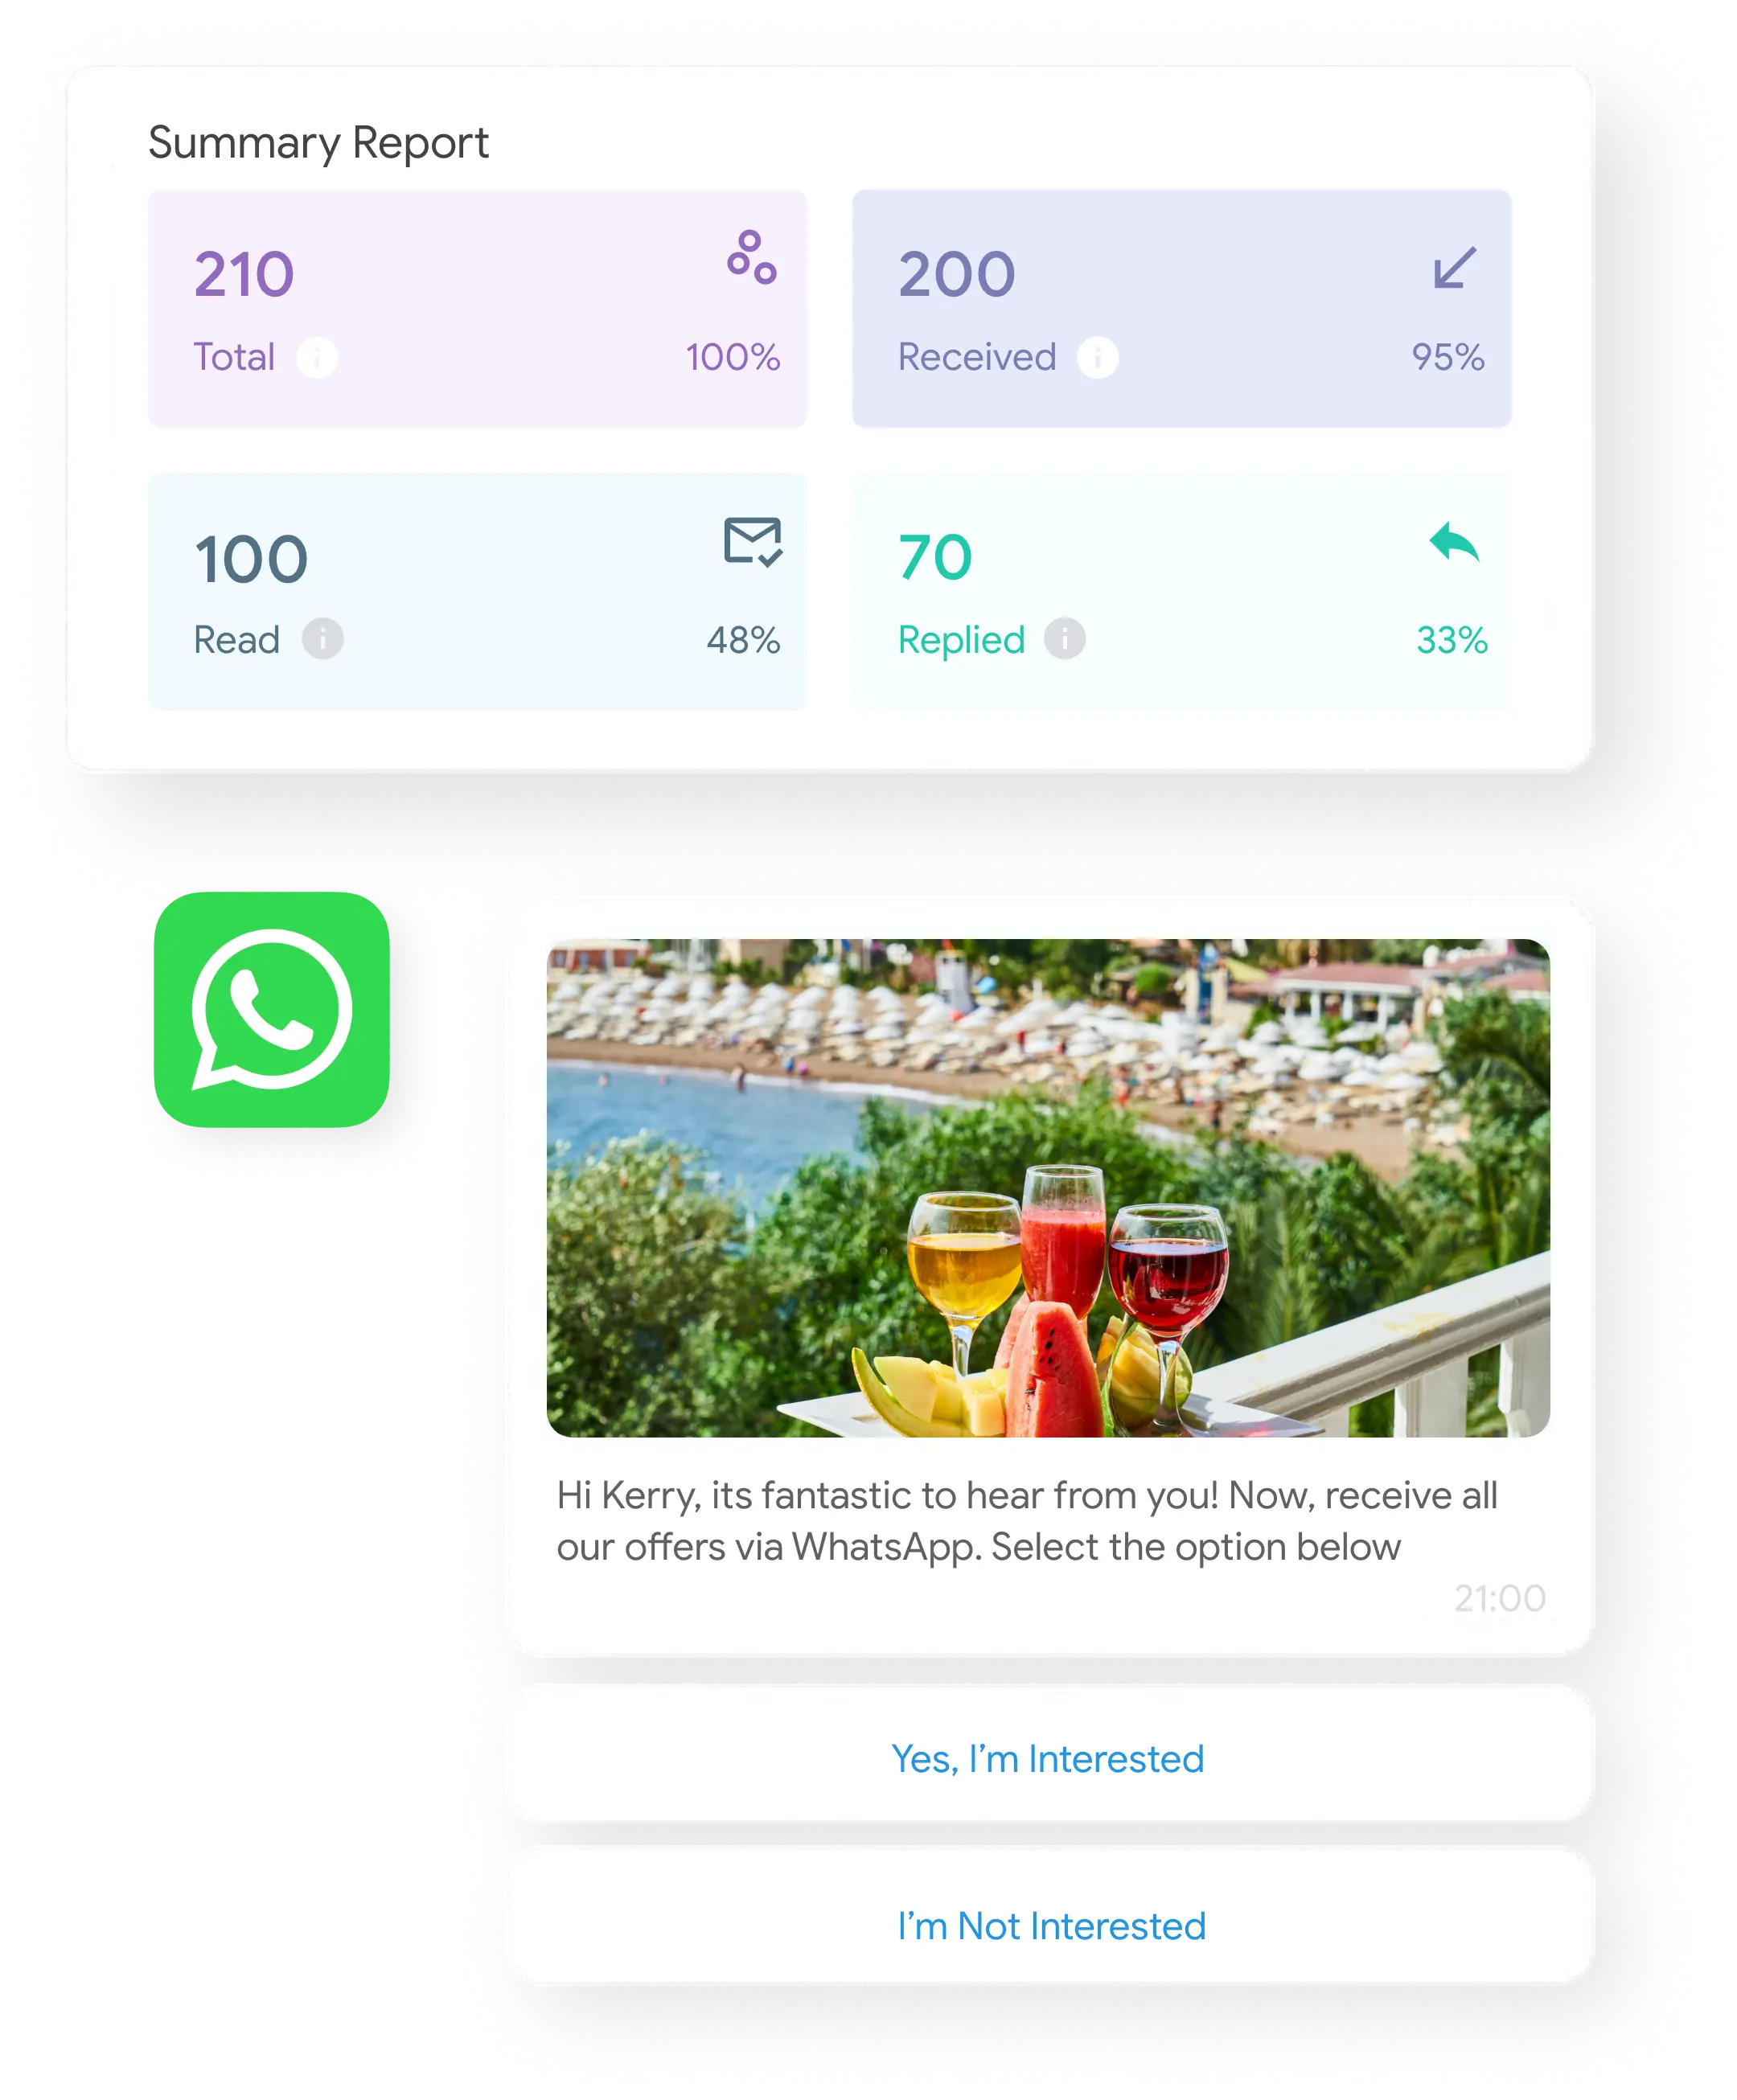 supercrm-dashboard-summary-and-whatsapp-chat